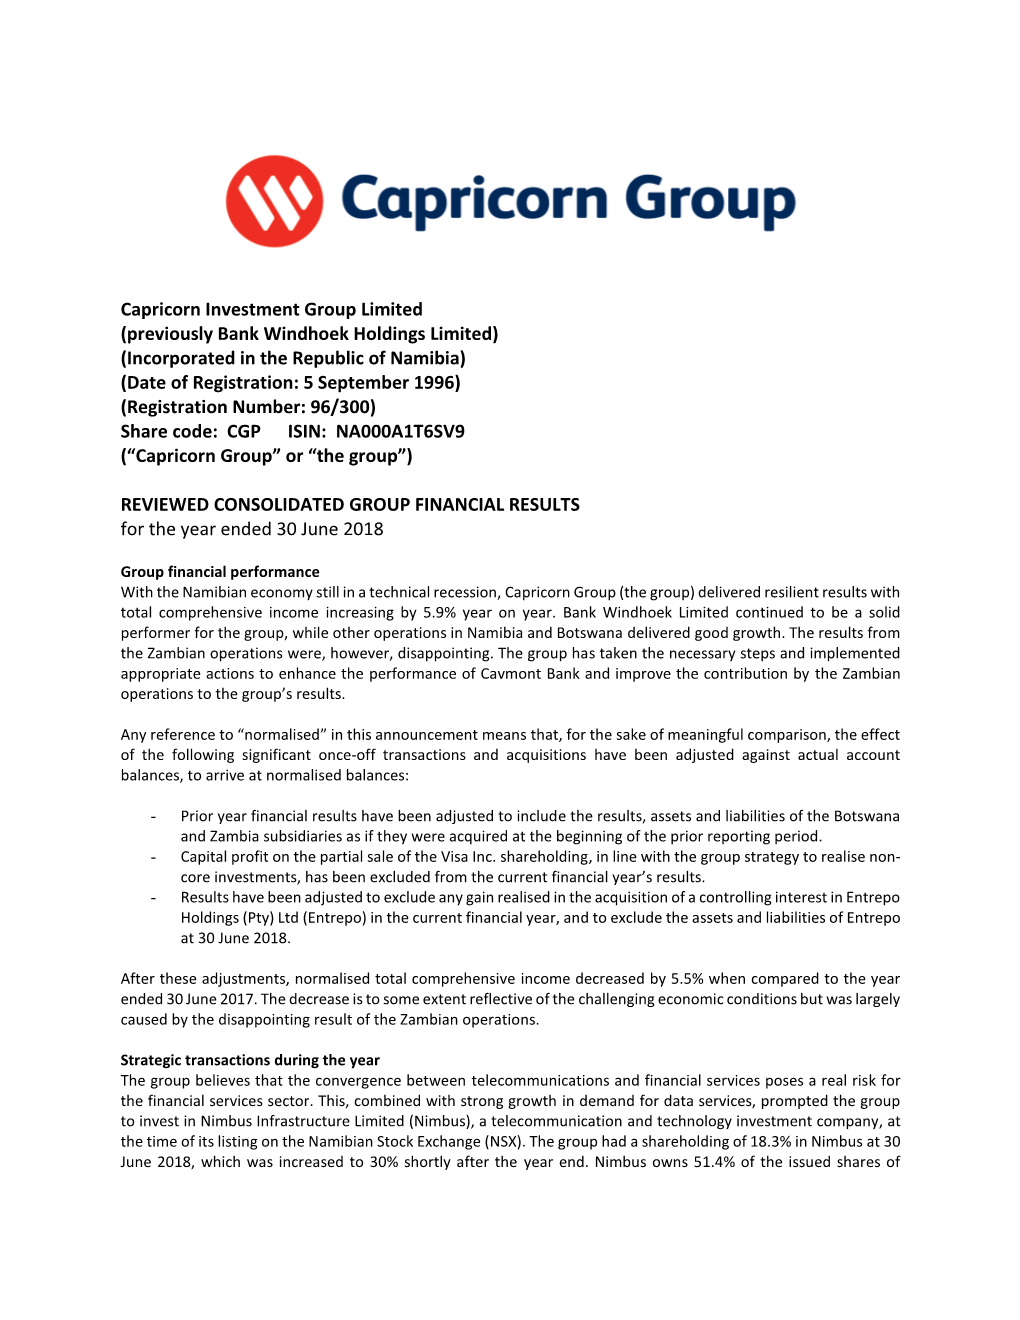 Capricorn Investment Group Limited (Previously Bank Windhoek